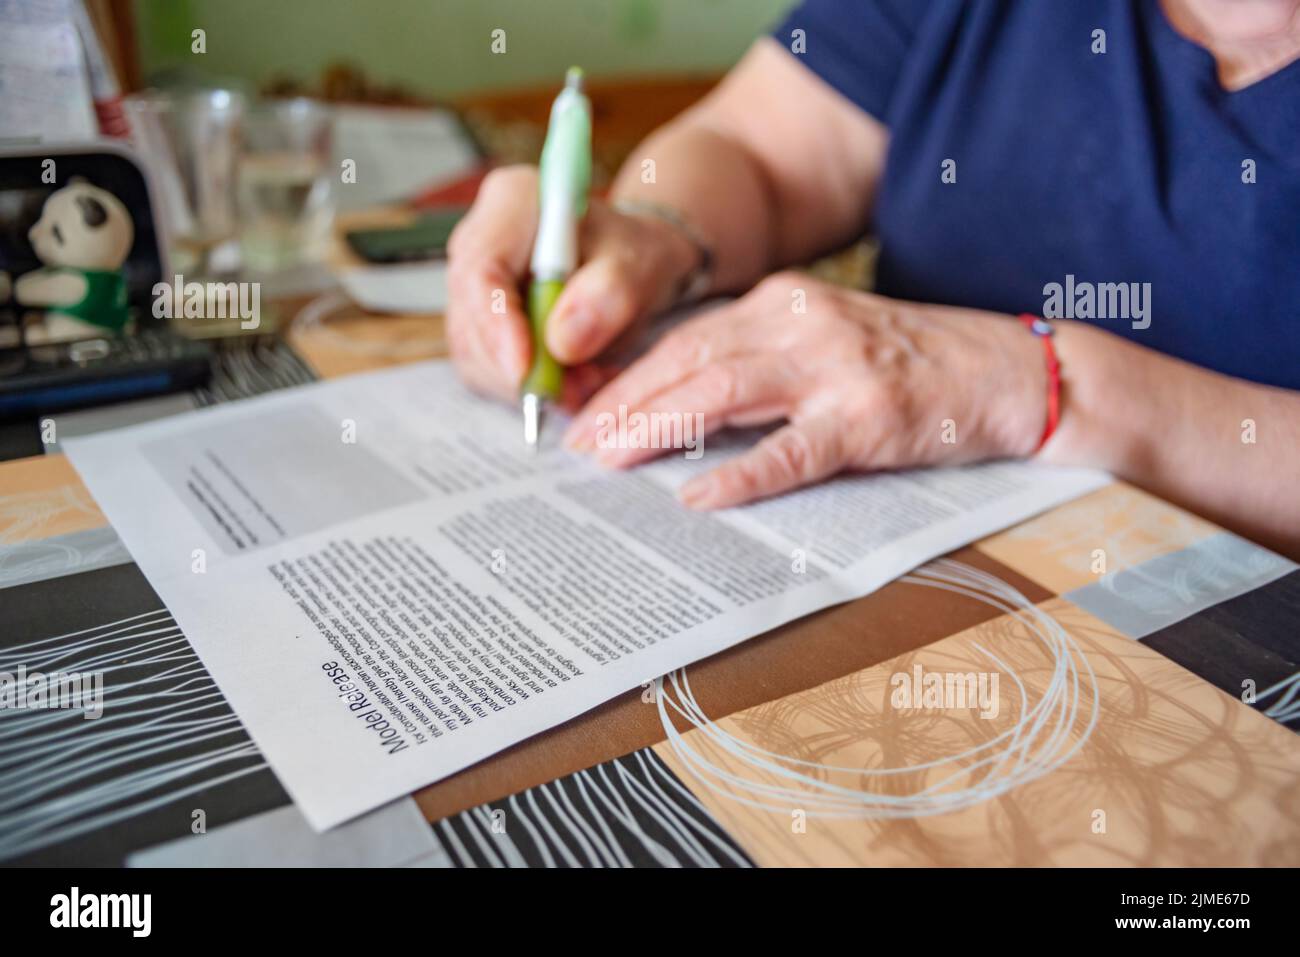 Model Release Form is Being Signed by Hands of an Elderly Woman at Home Stock Photo